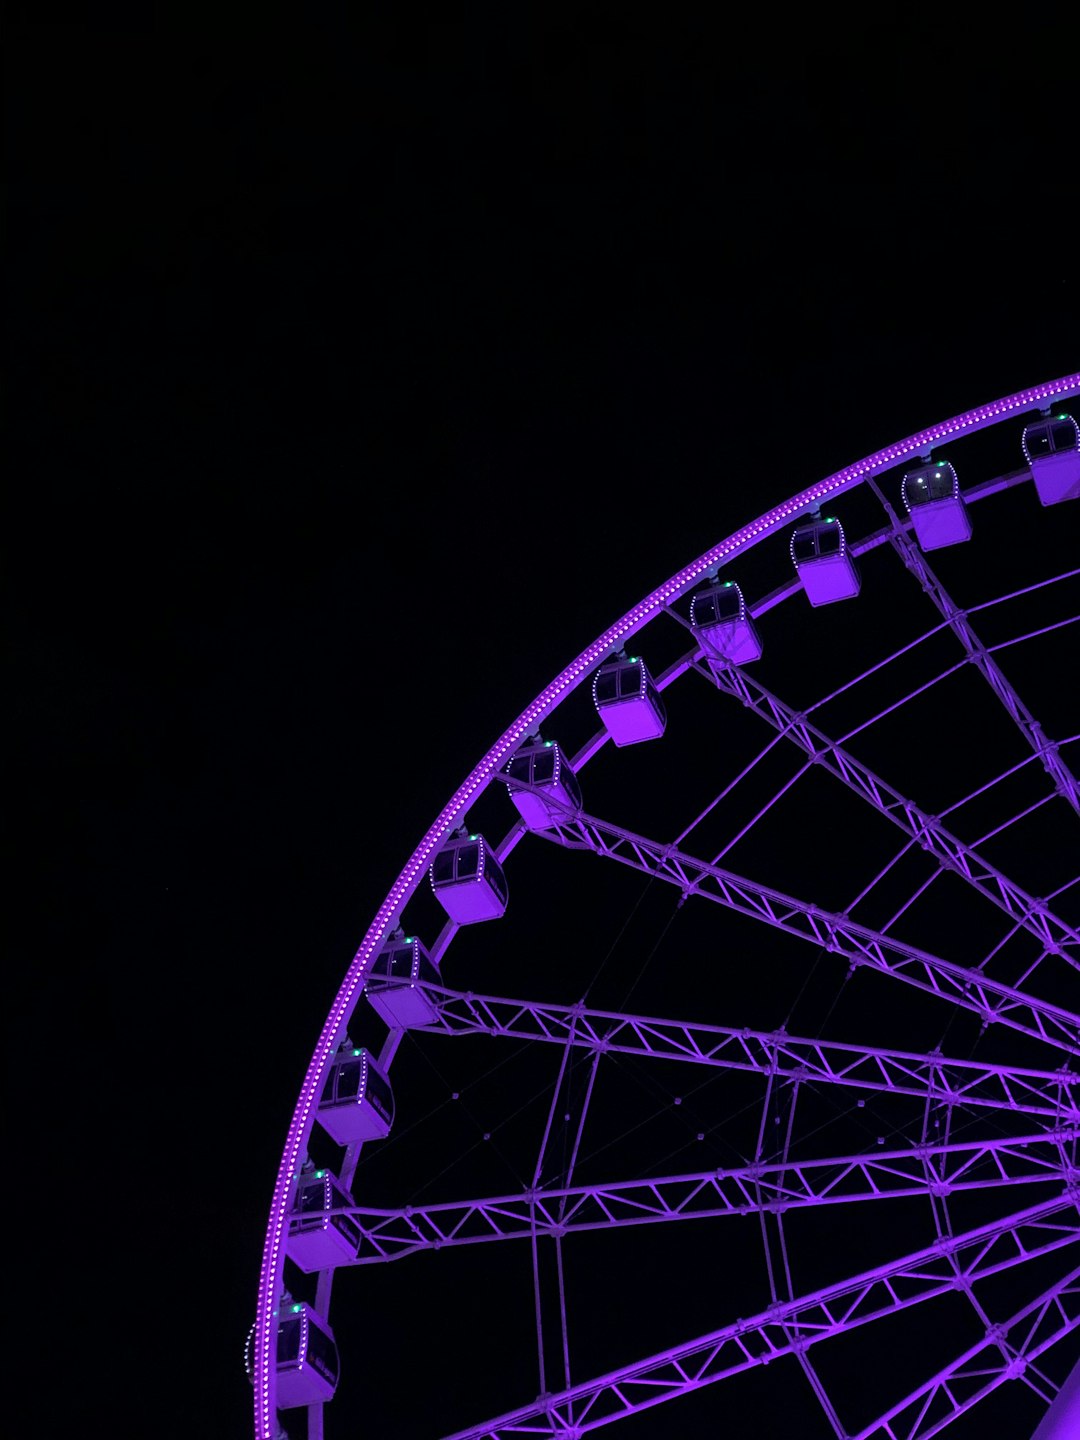 travelers stories about Ferris wheel in Montréal, Canada